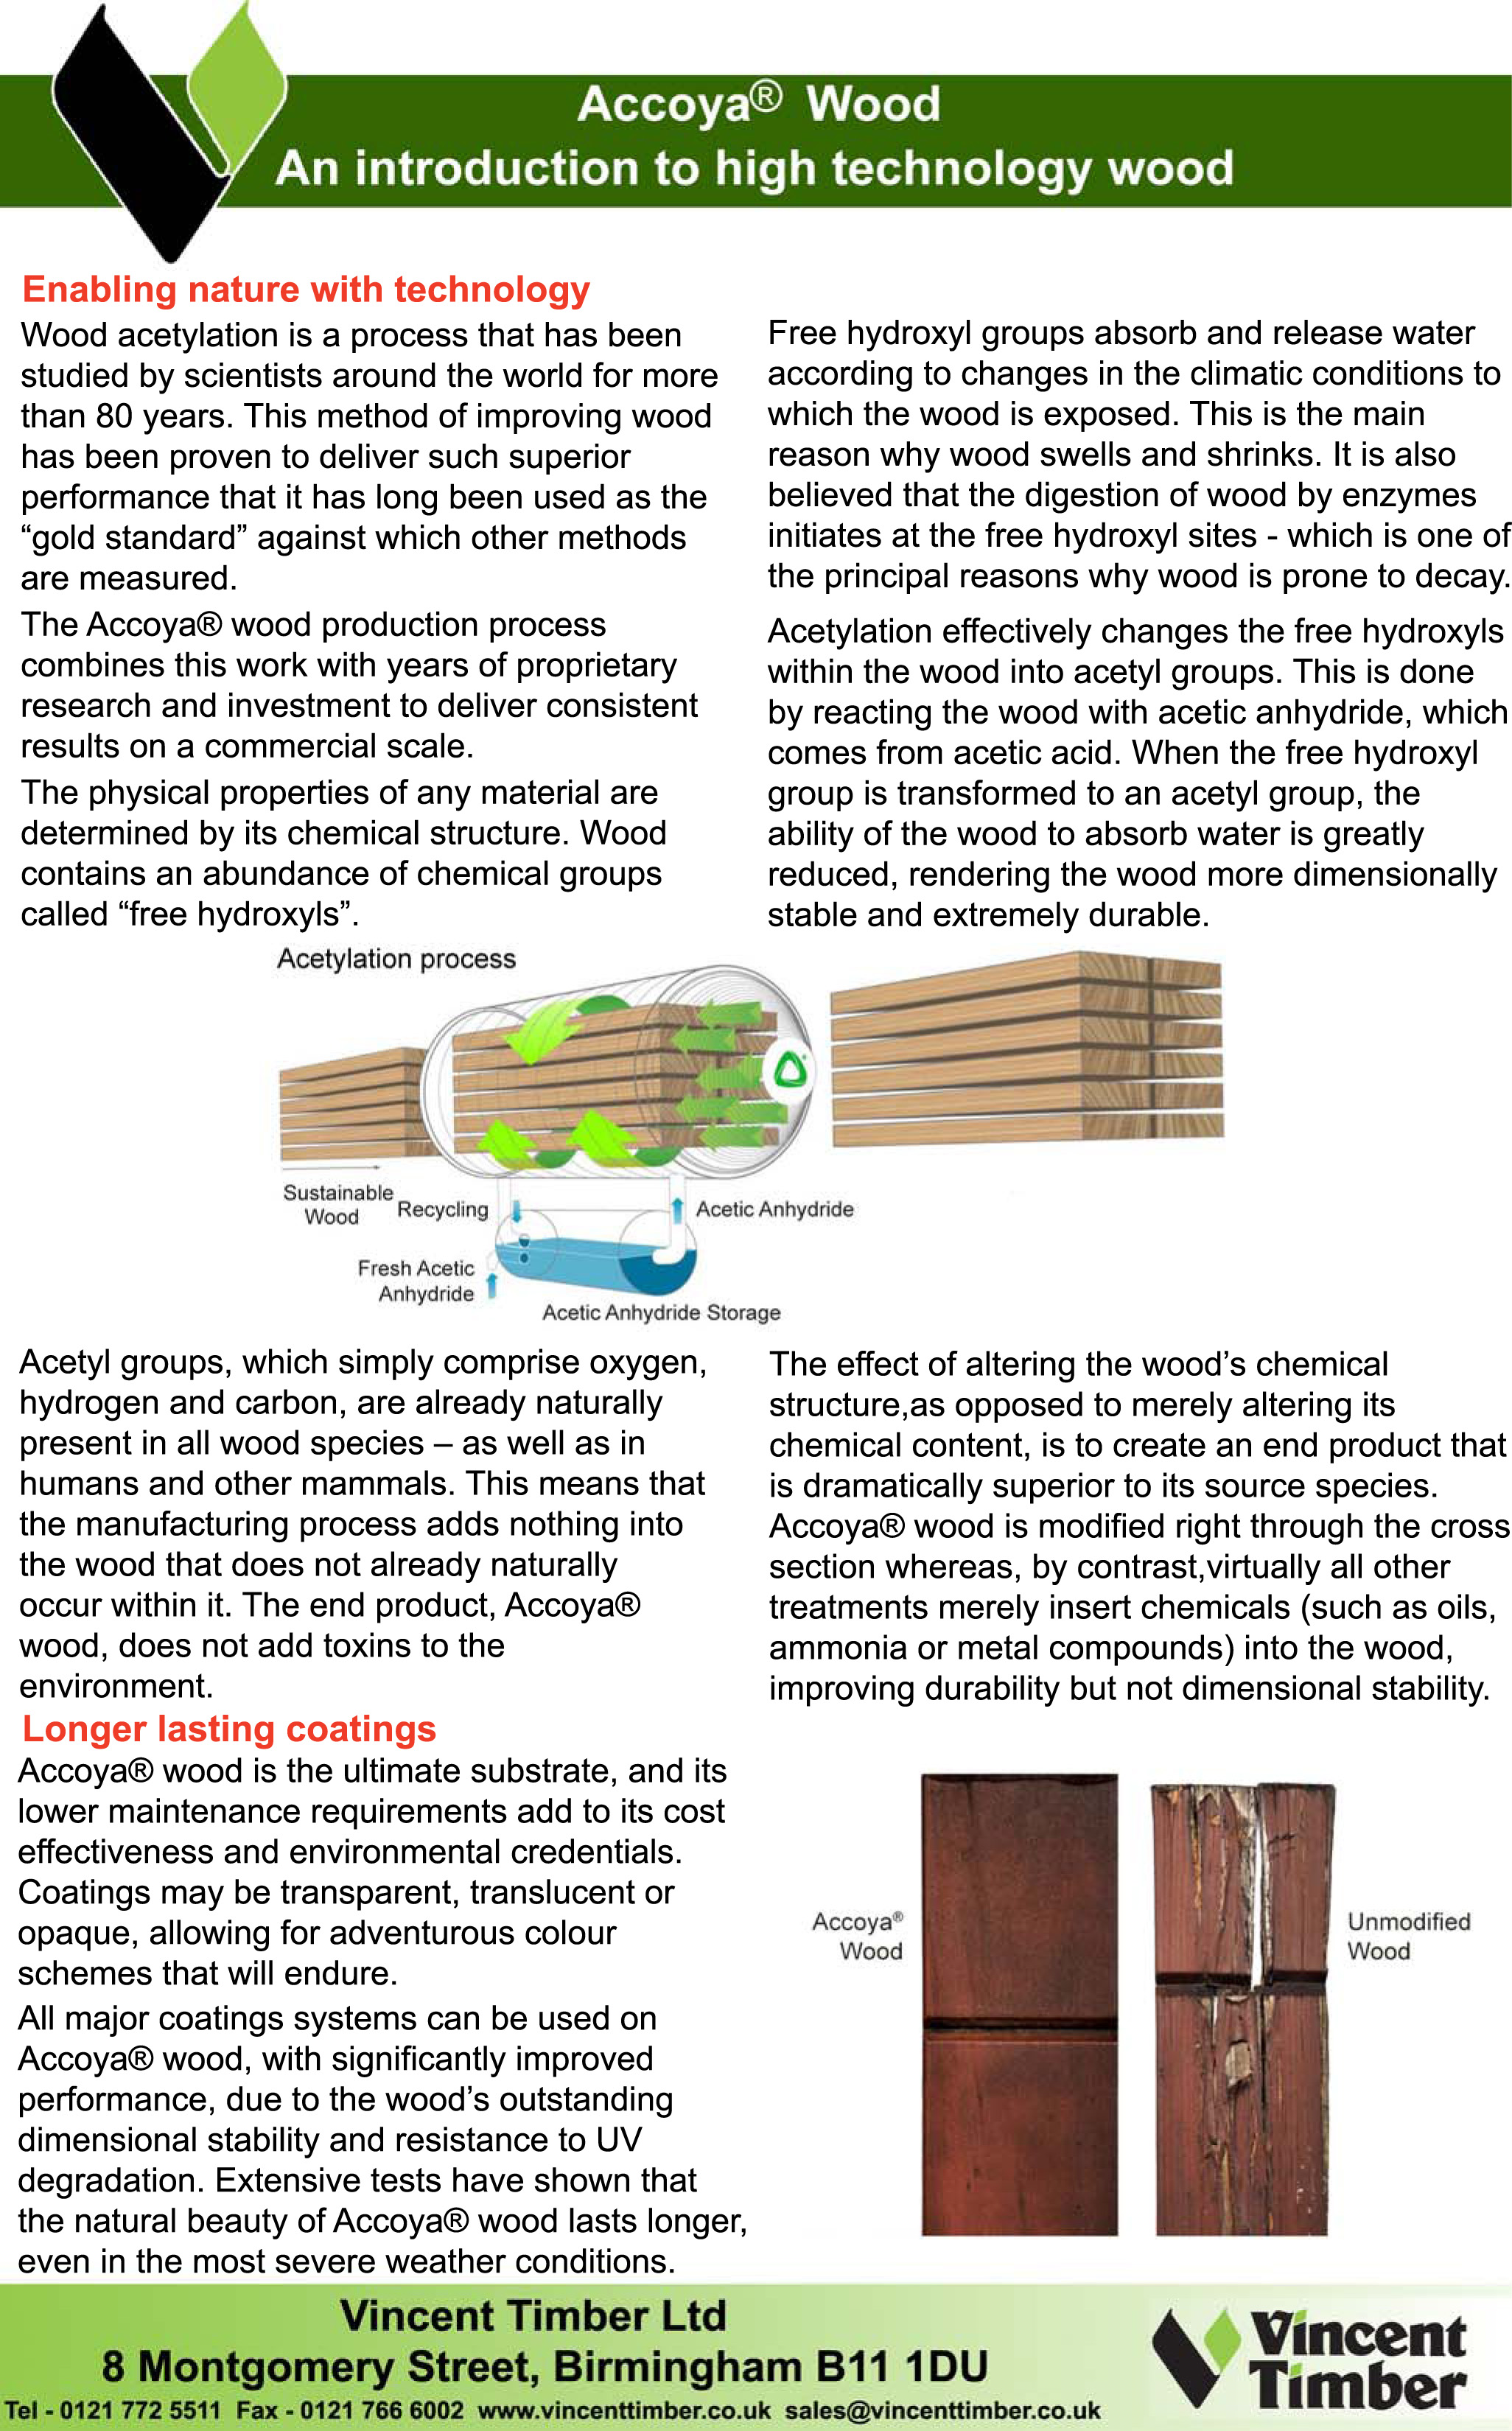 About the process of Acetylation used to produce Accoya ®